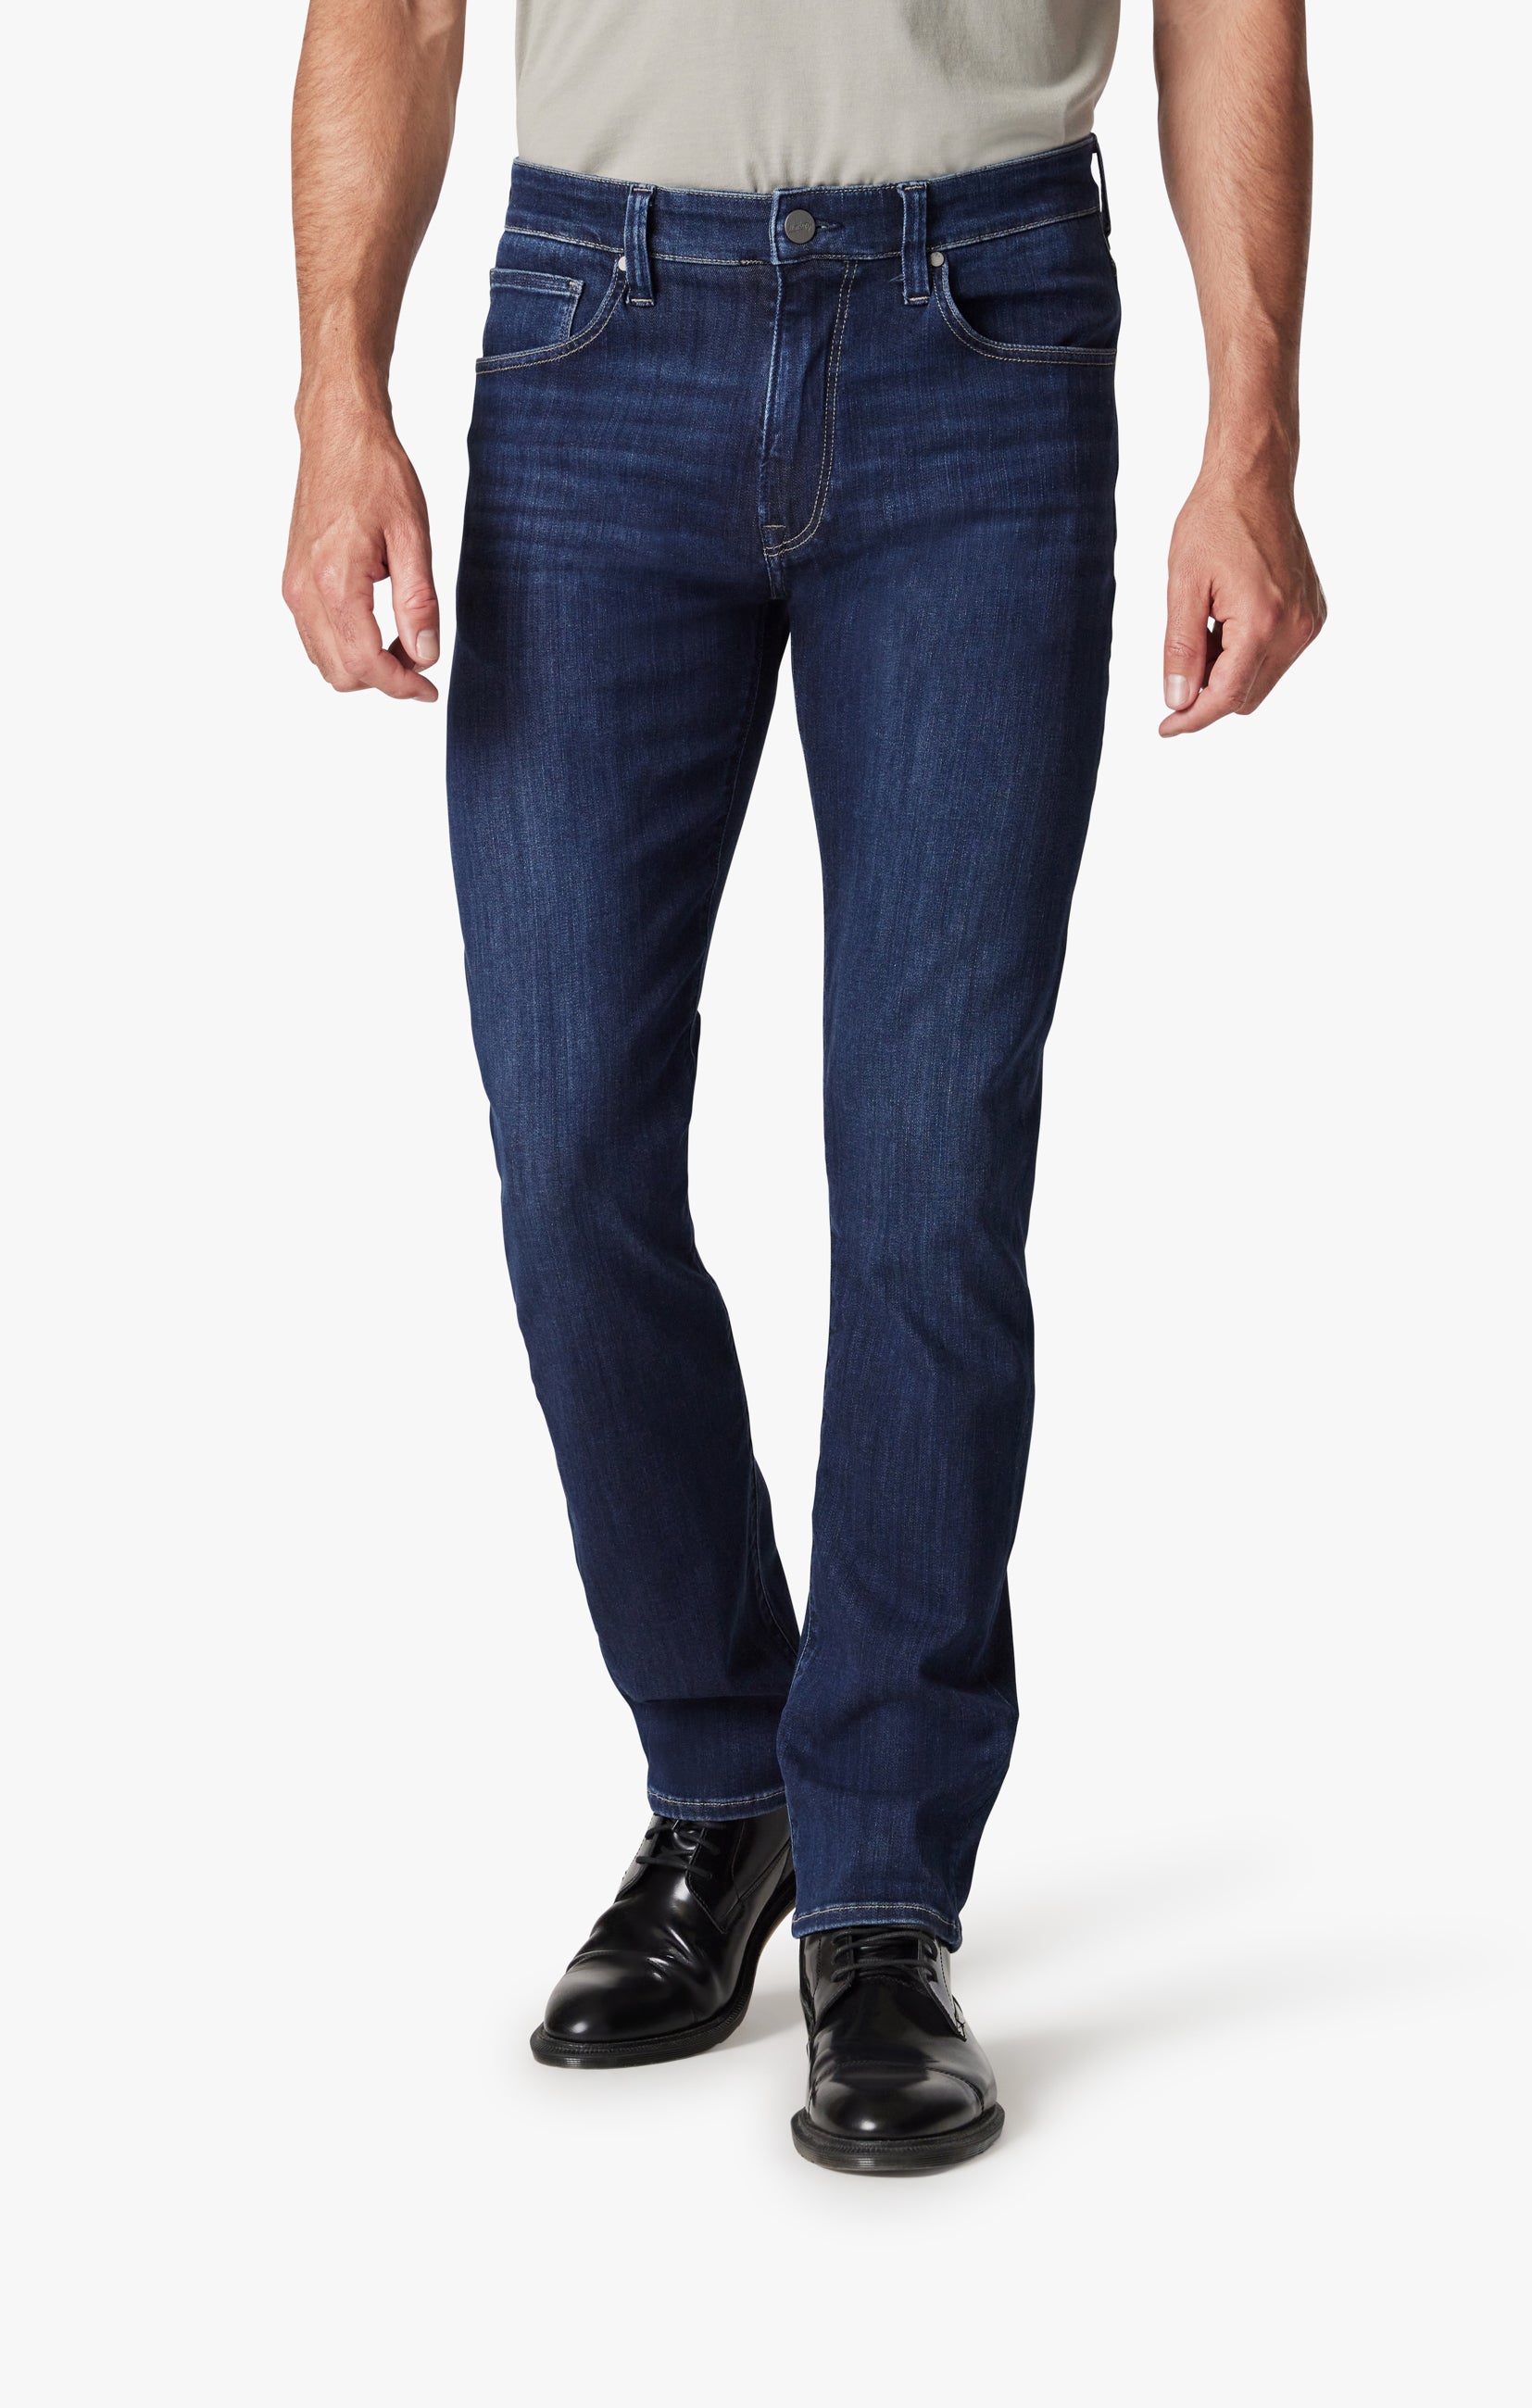 Champ Athletic Fit Jeans in Dark Brushed Refined